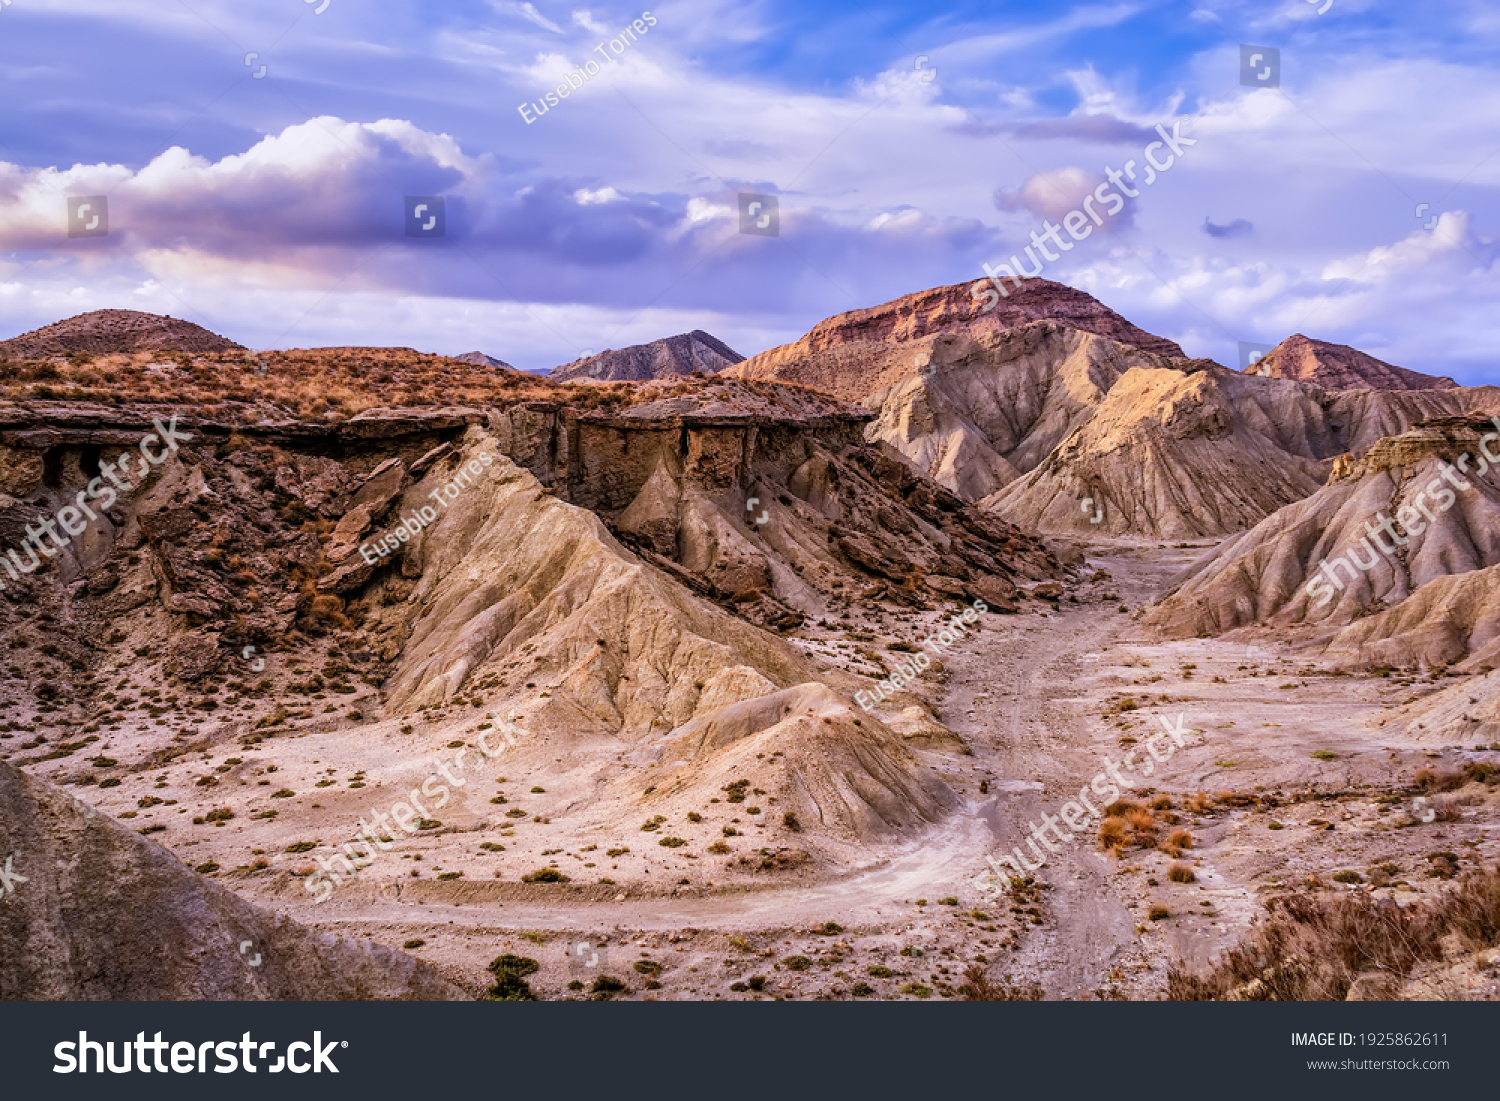 Spectacular view of the Rambla de Otero, in the Tabernas Desert, with a panoramic view used in the movie Lawrence of Arabia. In a scene of Indiana Jones and the last crusade appear in the foreground. #1925862611